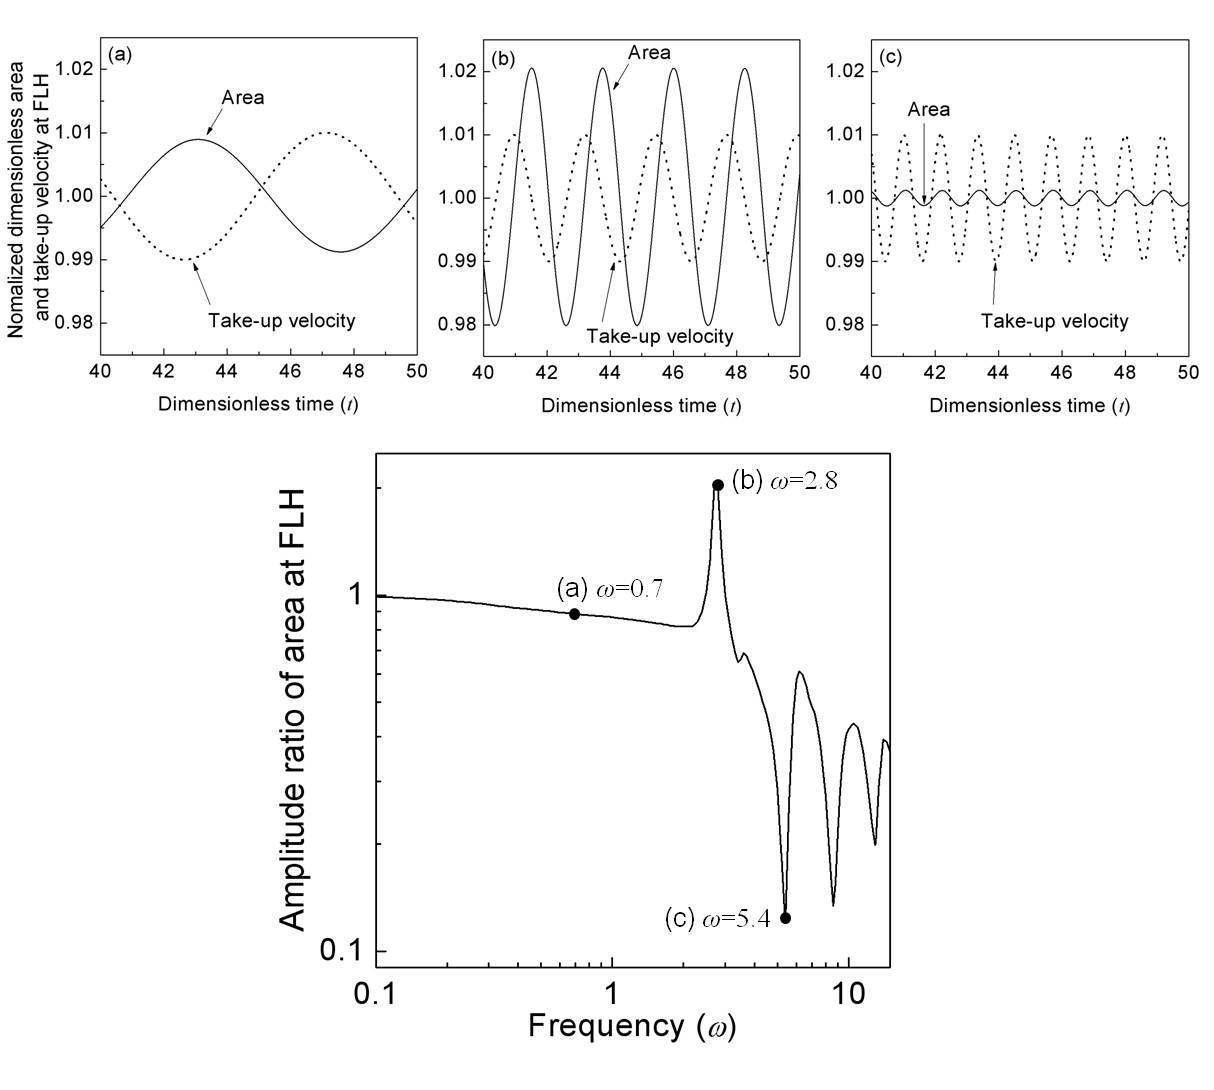 Frequency response of film area at FLH when a sinusoidal disturbance is imposed on take-up velocity.